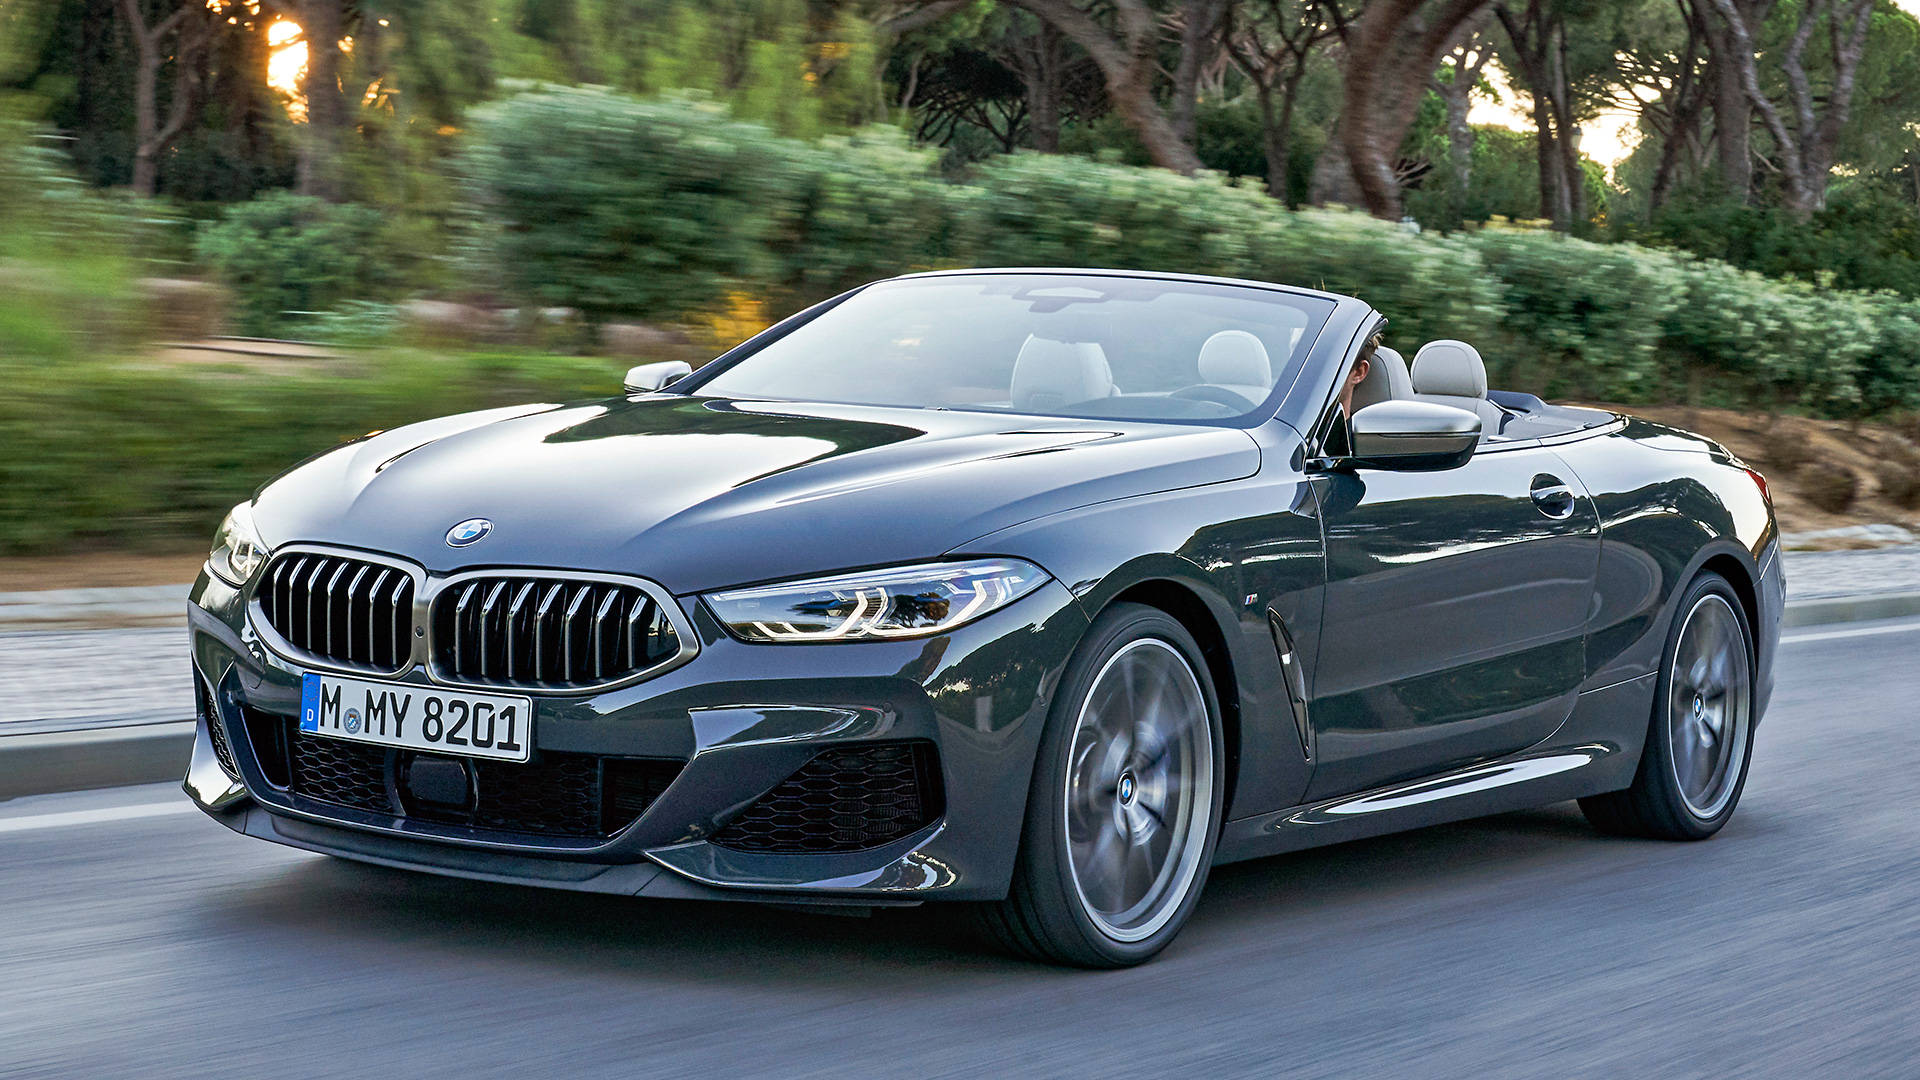 Unrivaled Luxury: The 2019 BMW 8 Series Convertible